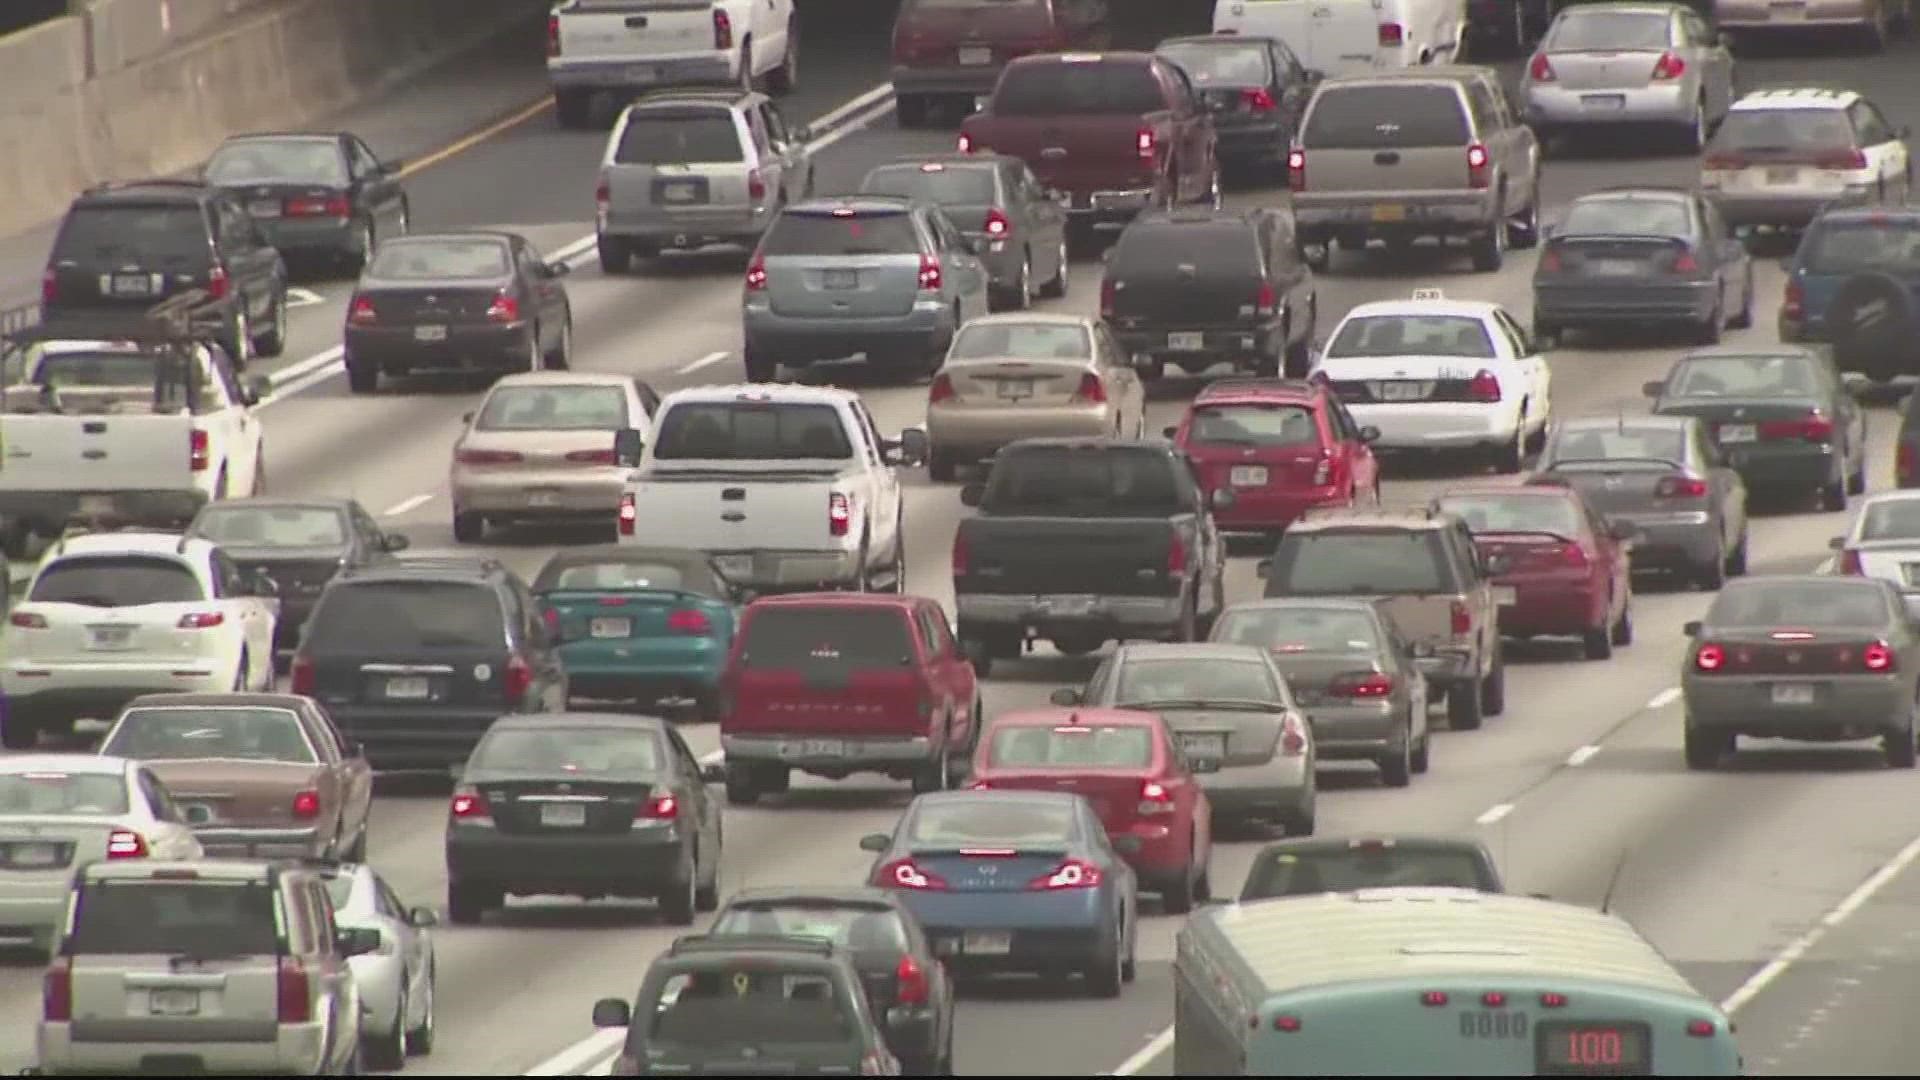 Between 3:45 p.m. and 5:45 p.m. will be the worst time to travel in the DMV Thursday - the busiest day. The best times to drive will instead be Saturday or Sunday.